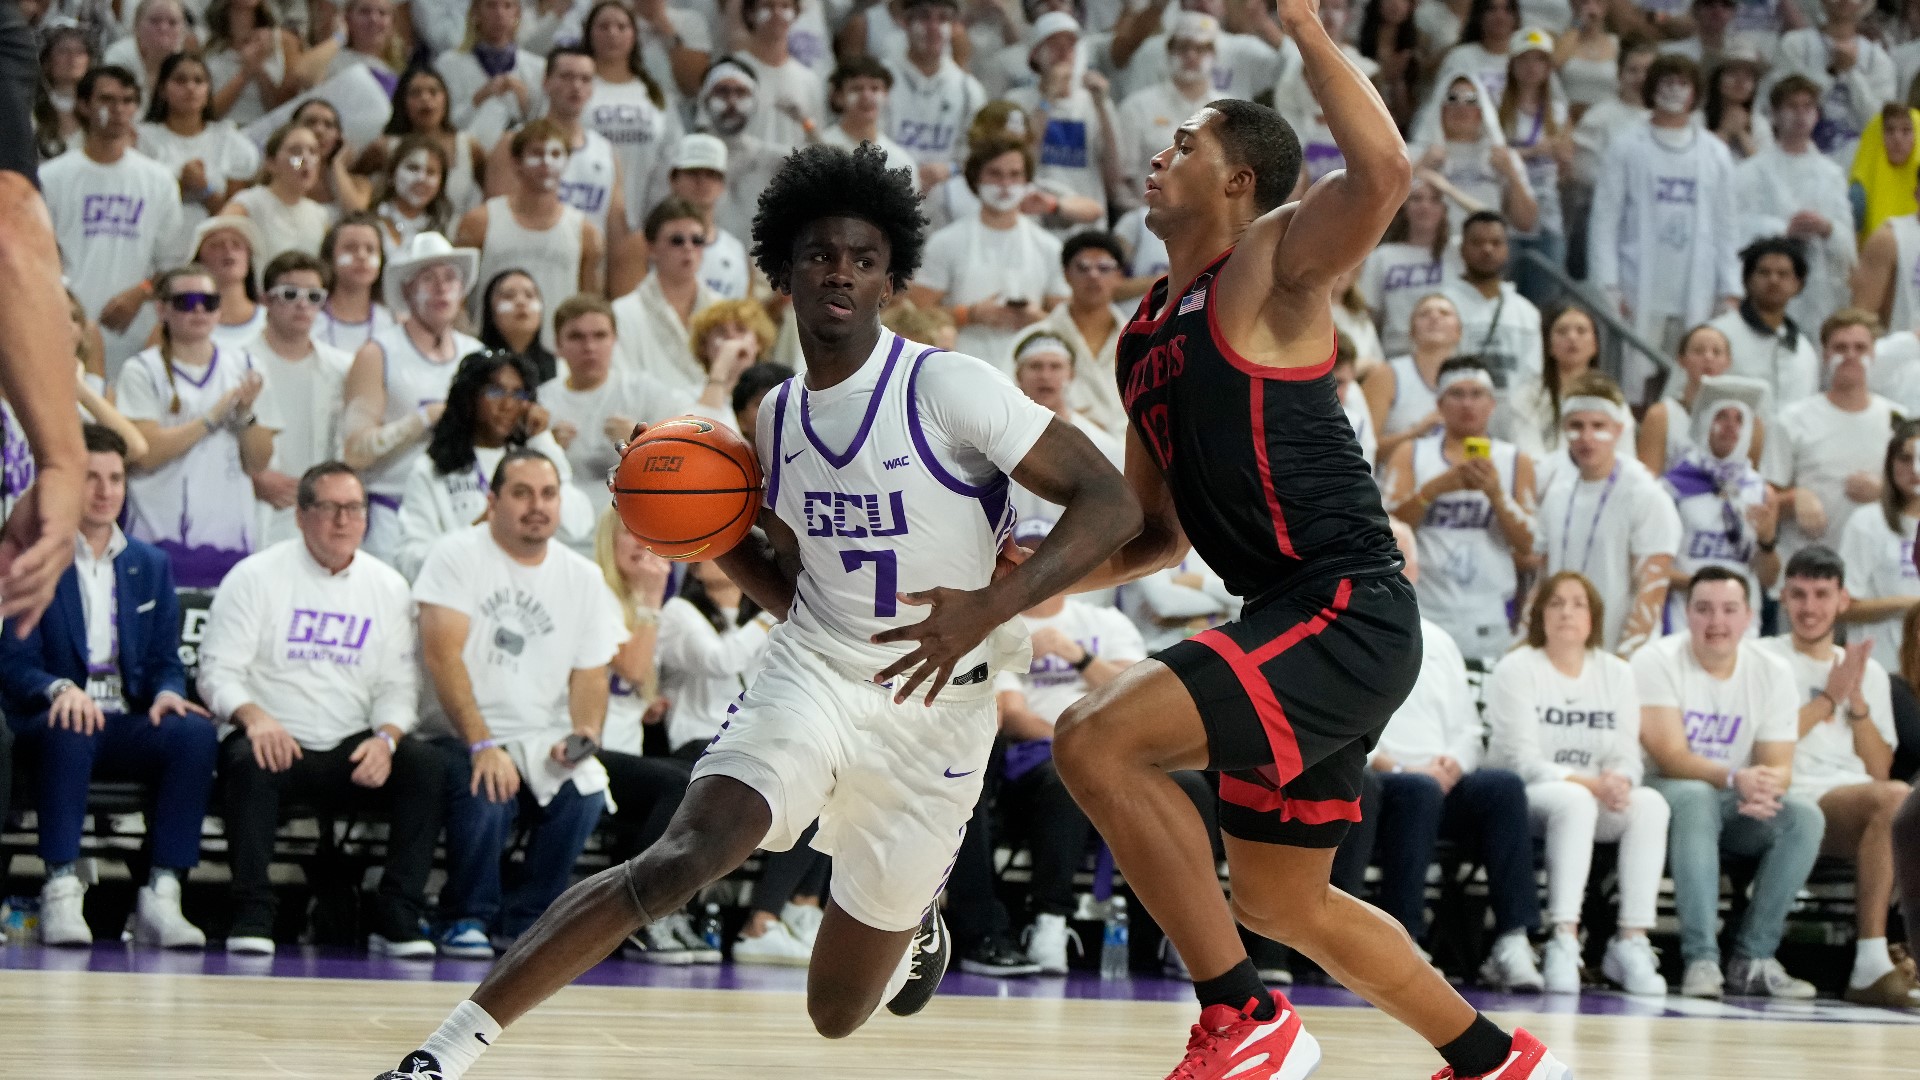 Tyon Grant-Foster endured and persevered through many battles before appearing in the WAC Tournament with No. 1-seeded Grand Canyon.